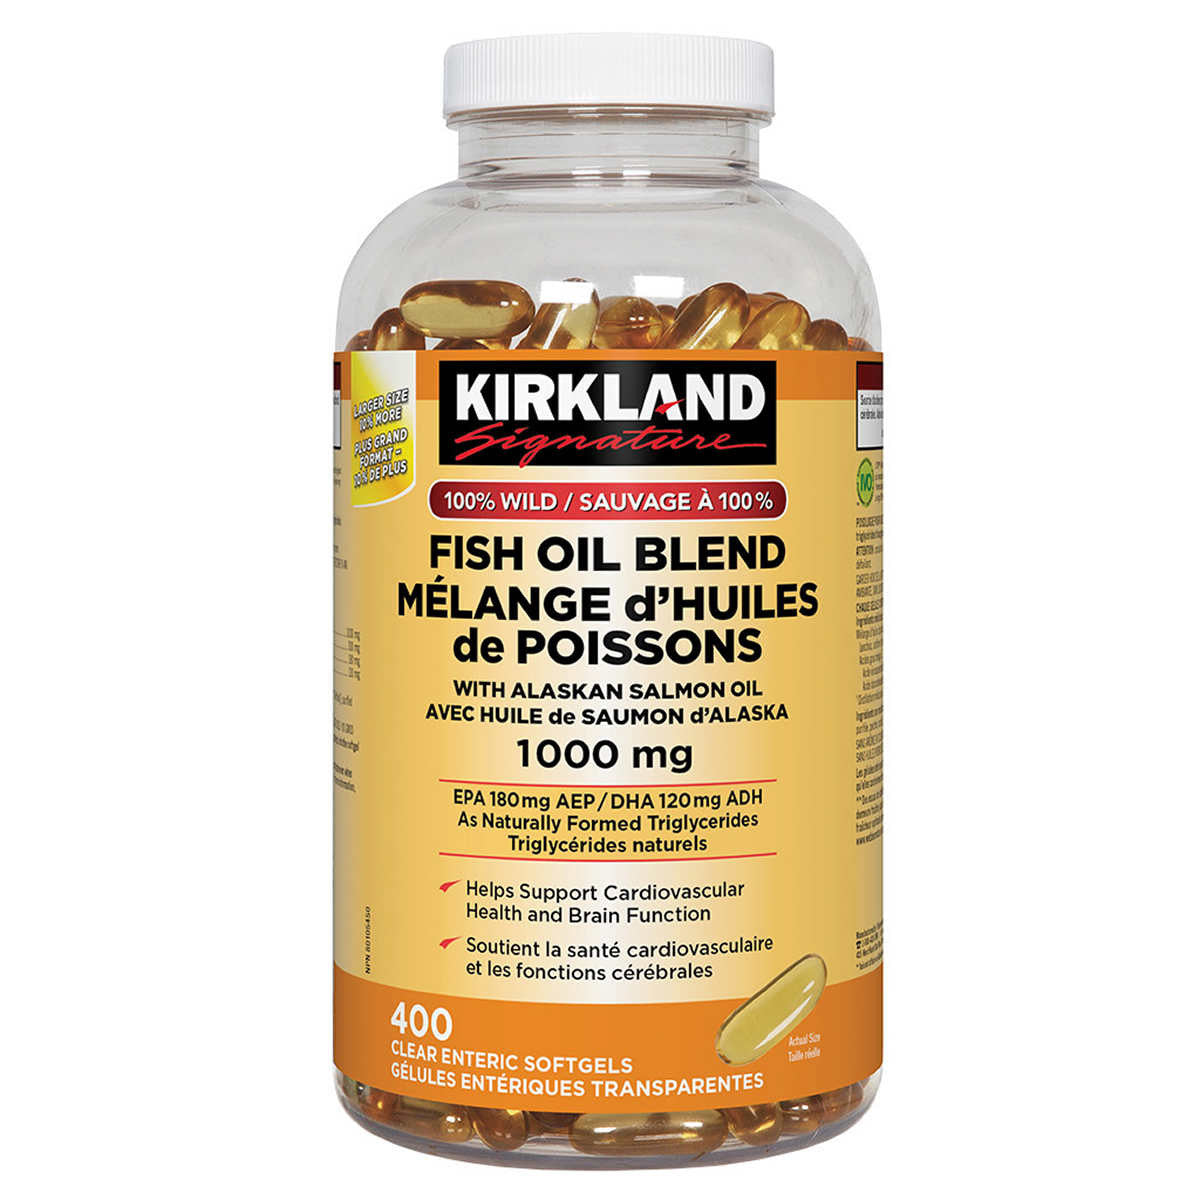 Kirkland Signature 100% Wild Fish Oil Blend with Alaskan Salmon Oil, 1000mg, 400 Softgels {Imported from Canada}